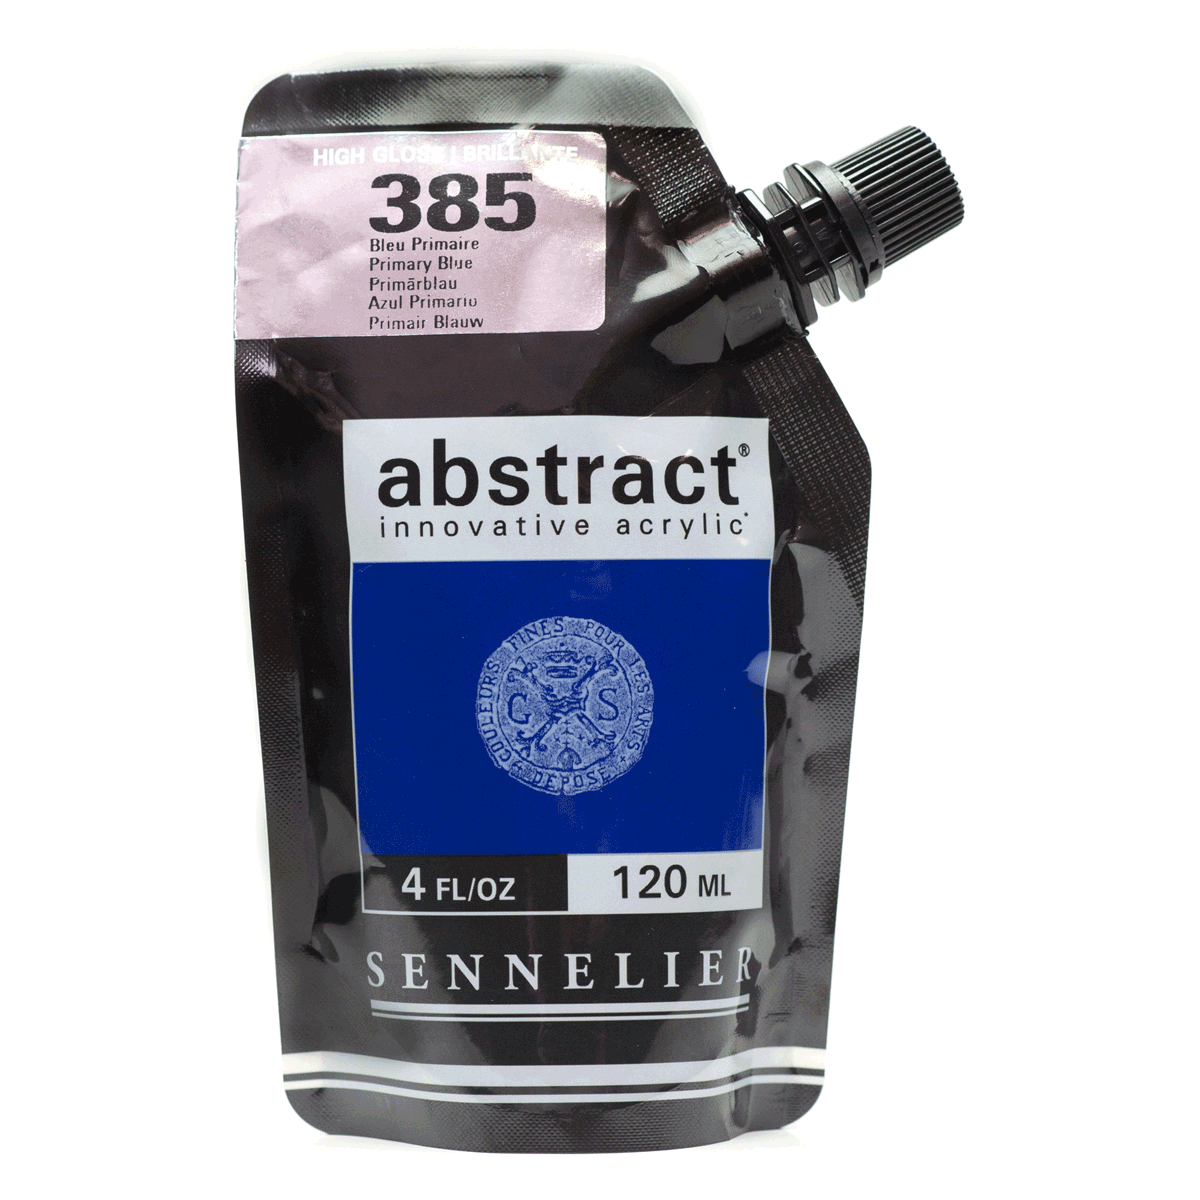 Abstract Acrylic Pouch - High Gloss 385B Primary Blue 120ml